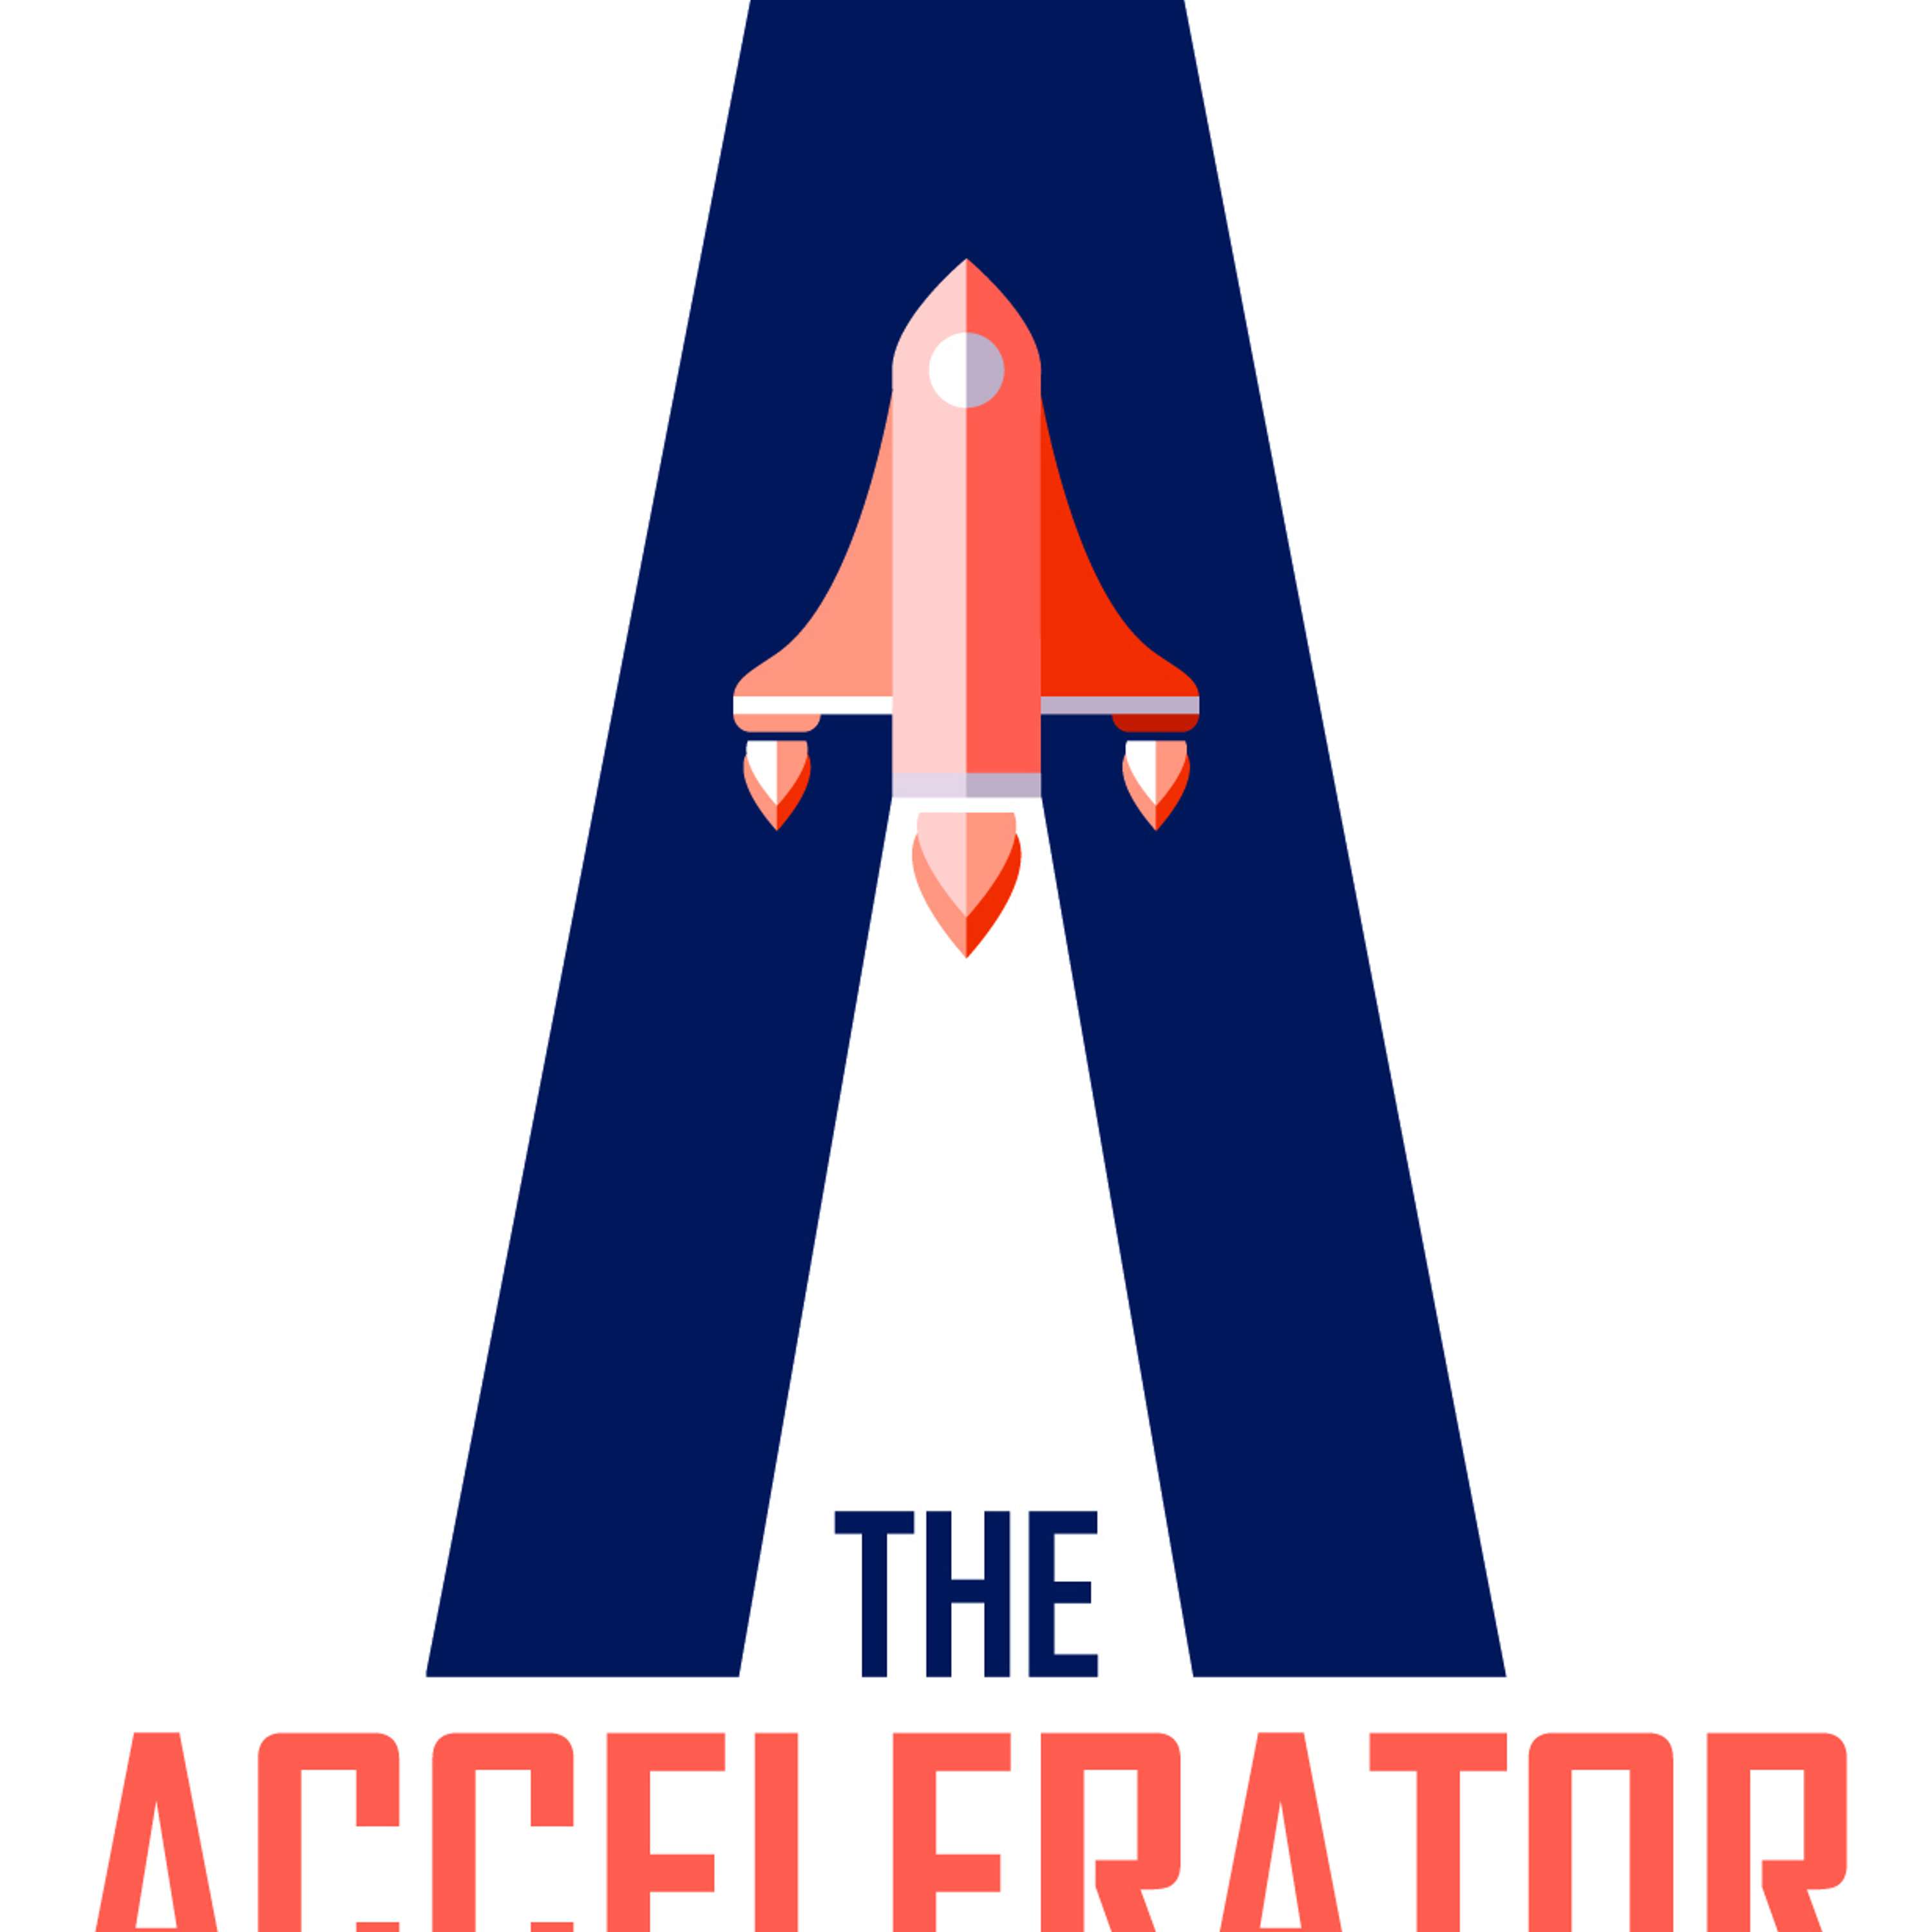 Pat Riley: How to Make an Impact with Your Startup through Accelerators